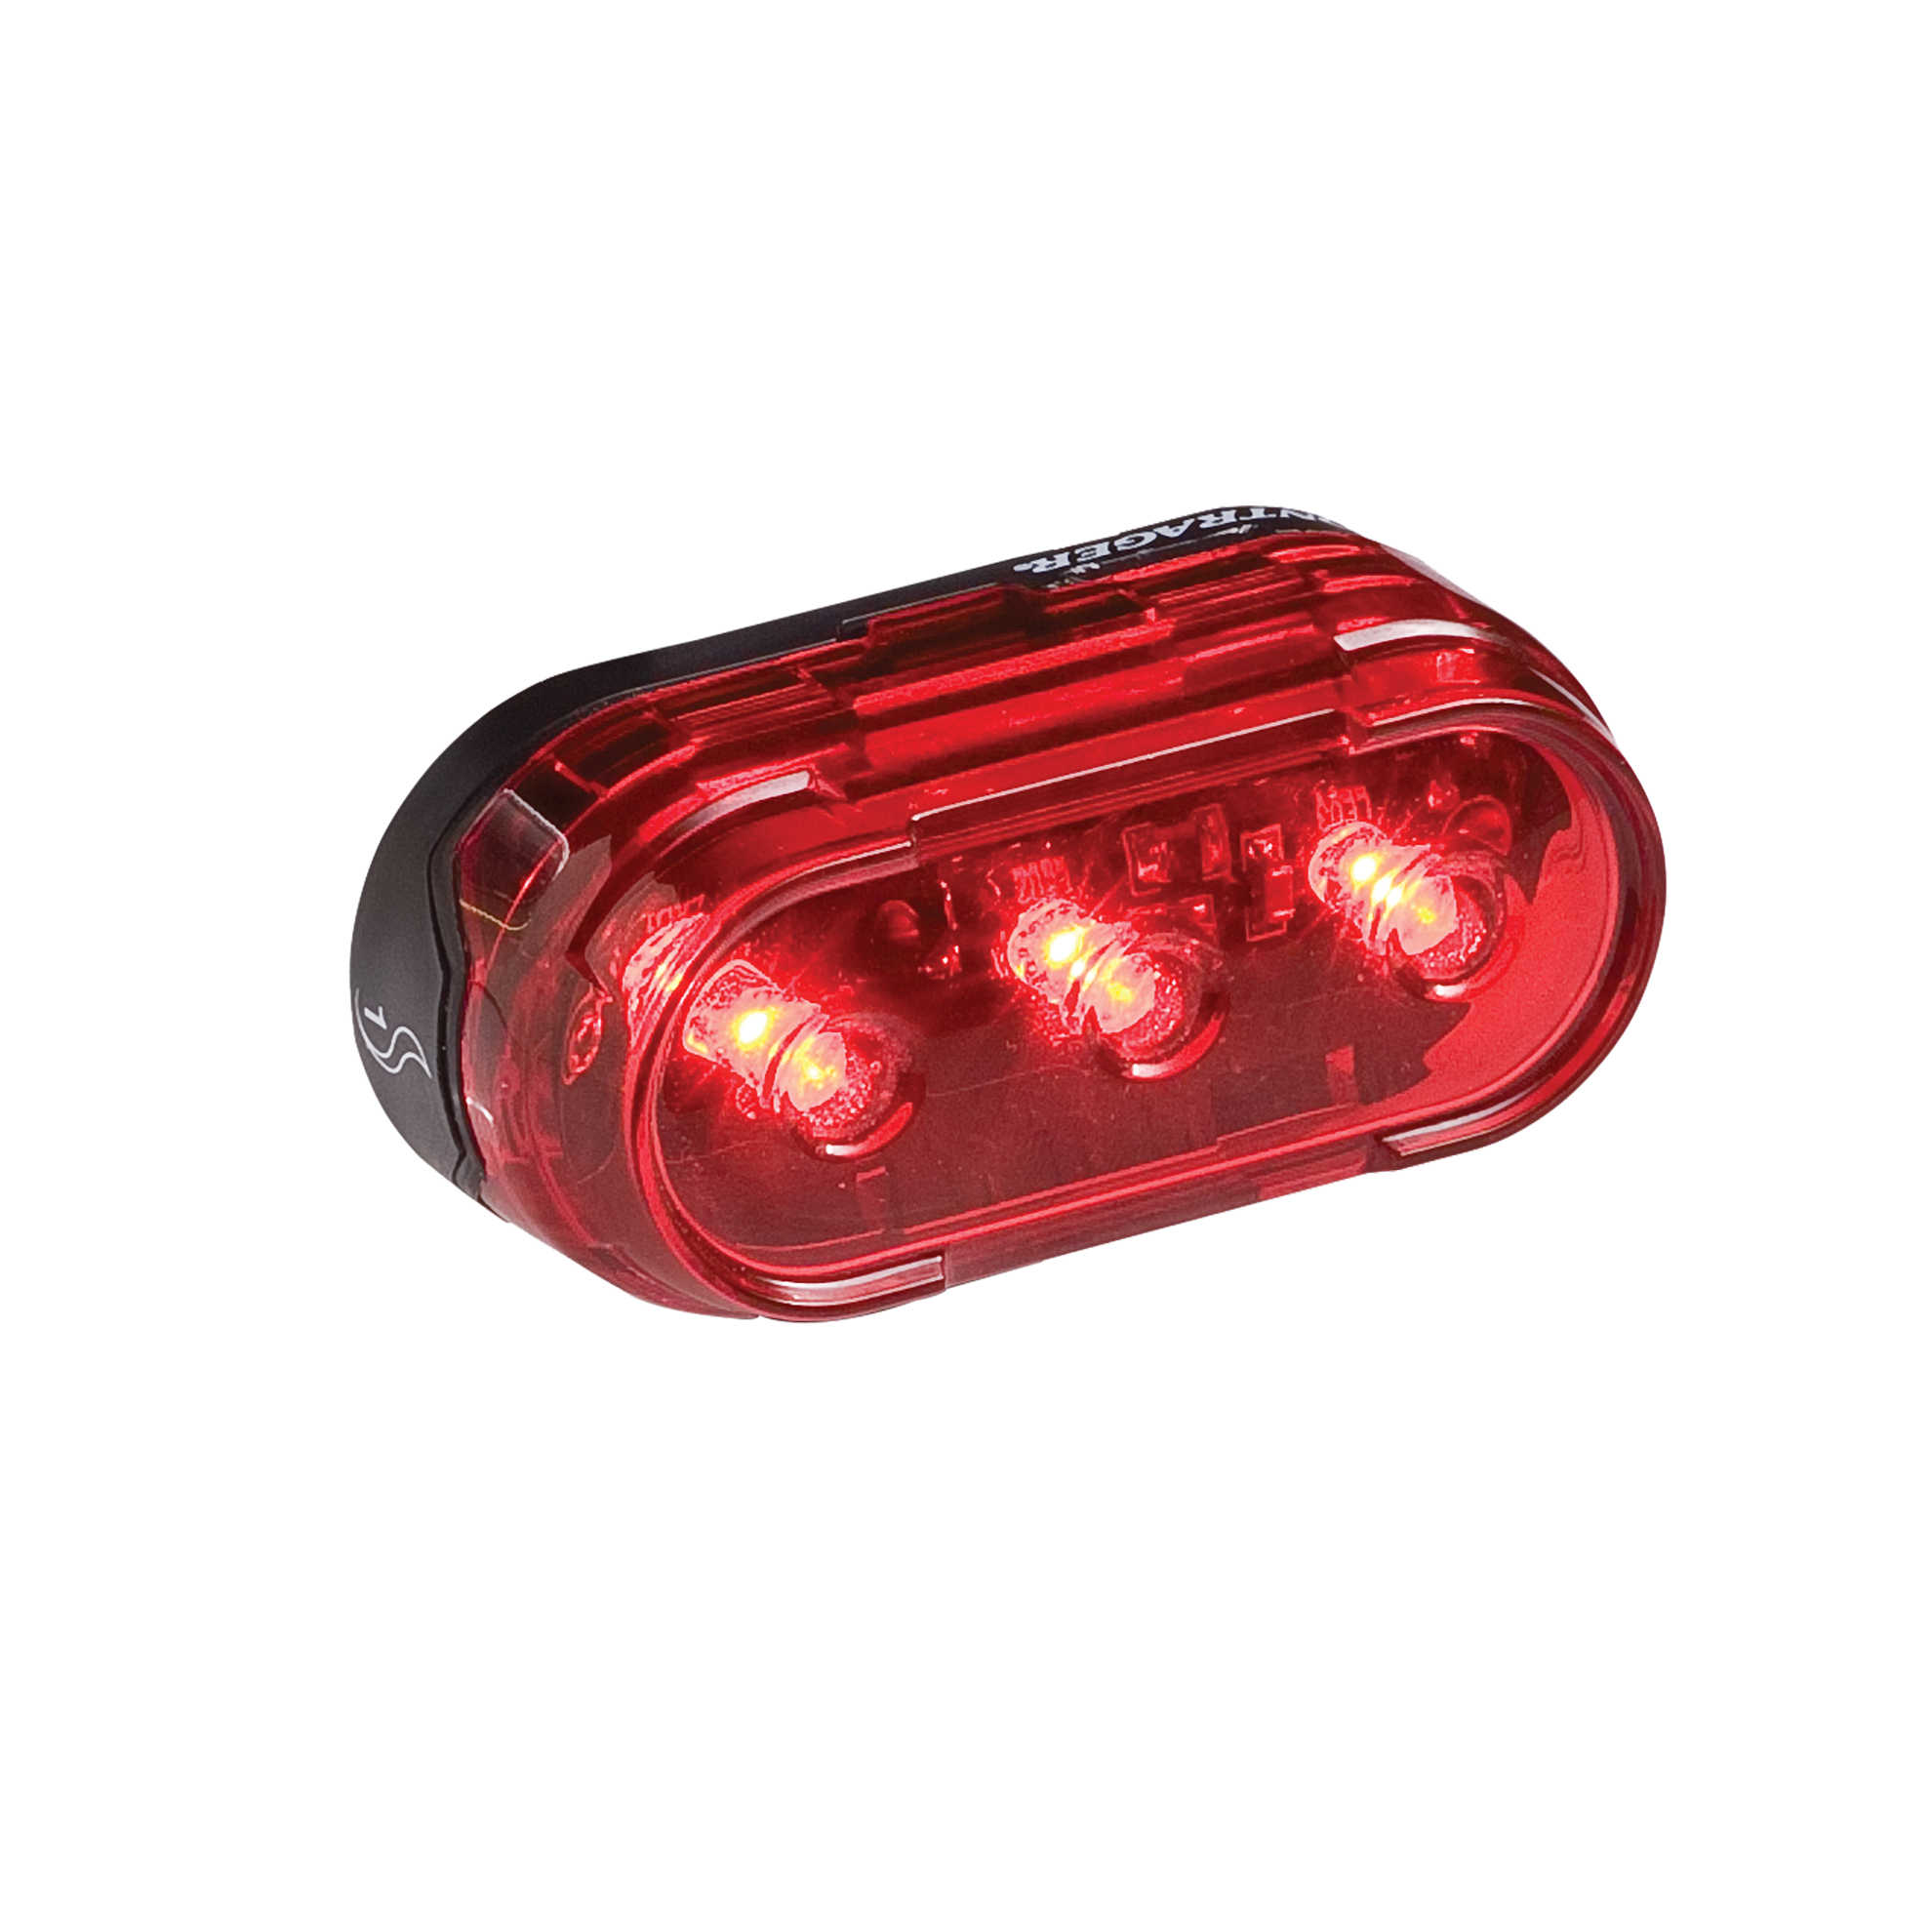 Bontrager Flare 1 Tail Light graphic